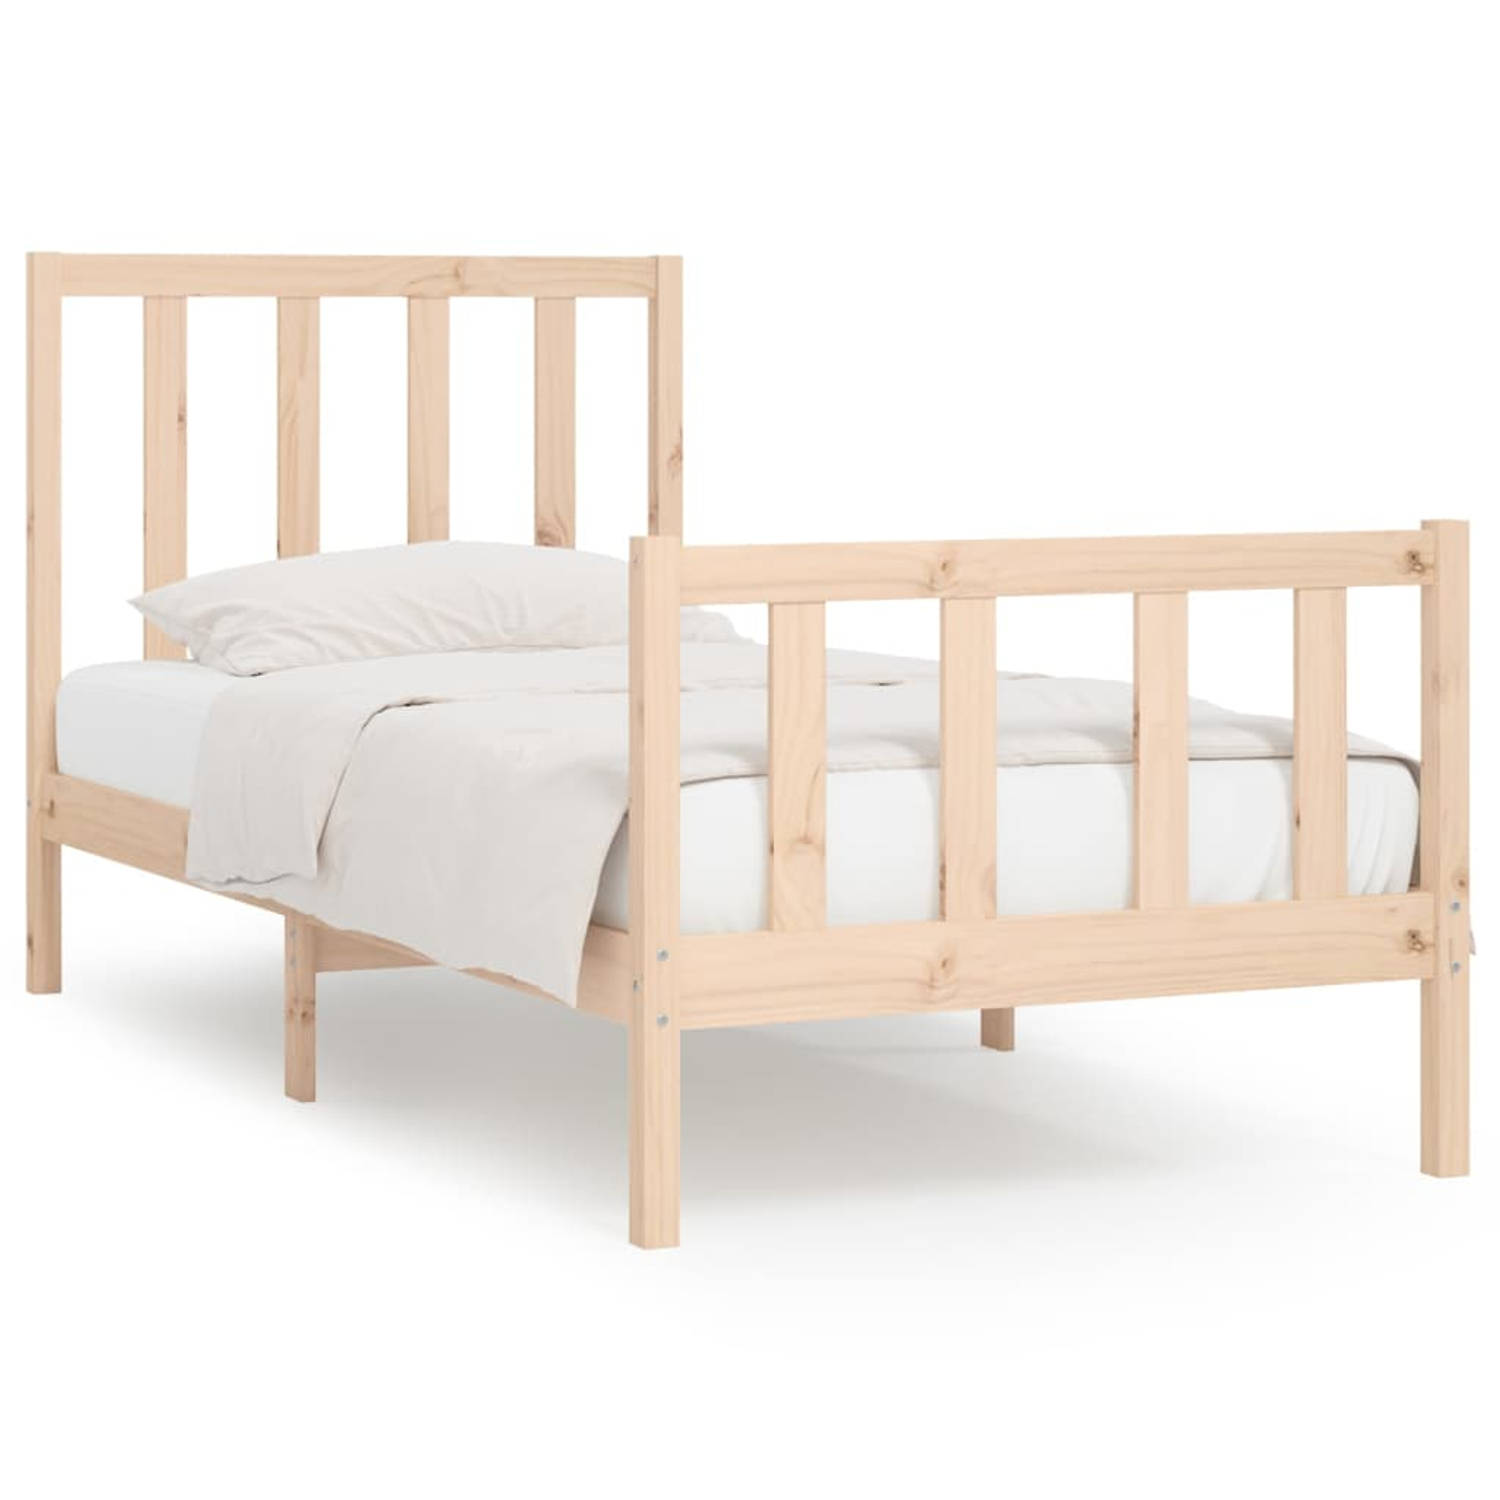 The Living Store Bedframe massief hout 90x190 cm 3FT Single - Bedframe - Bedframes - Eenpersoonsbed - Bed - Bedombouw - Ledikant - Houten Bedframe - Eenpersoonsbedden - Bedden - Be